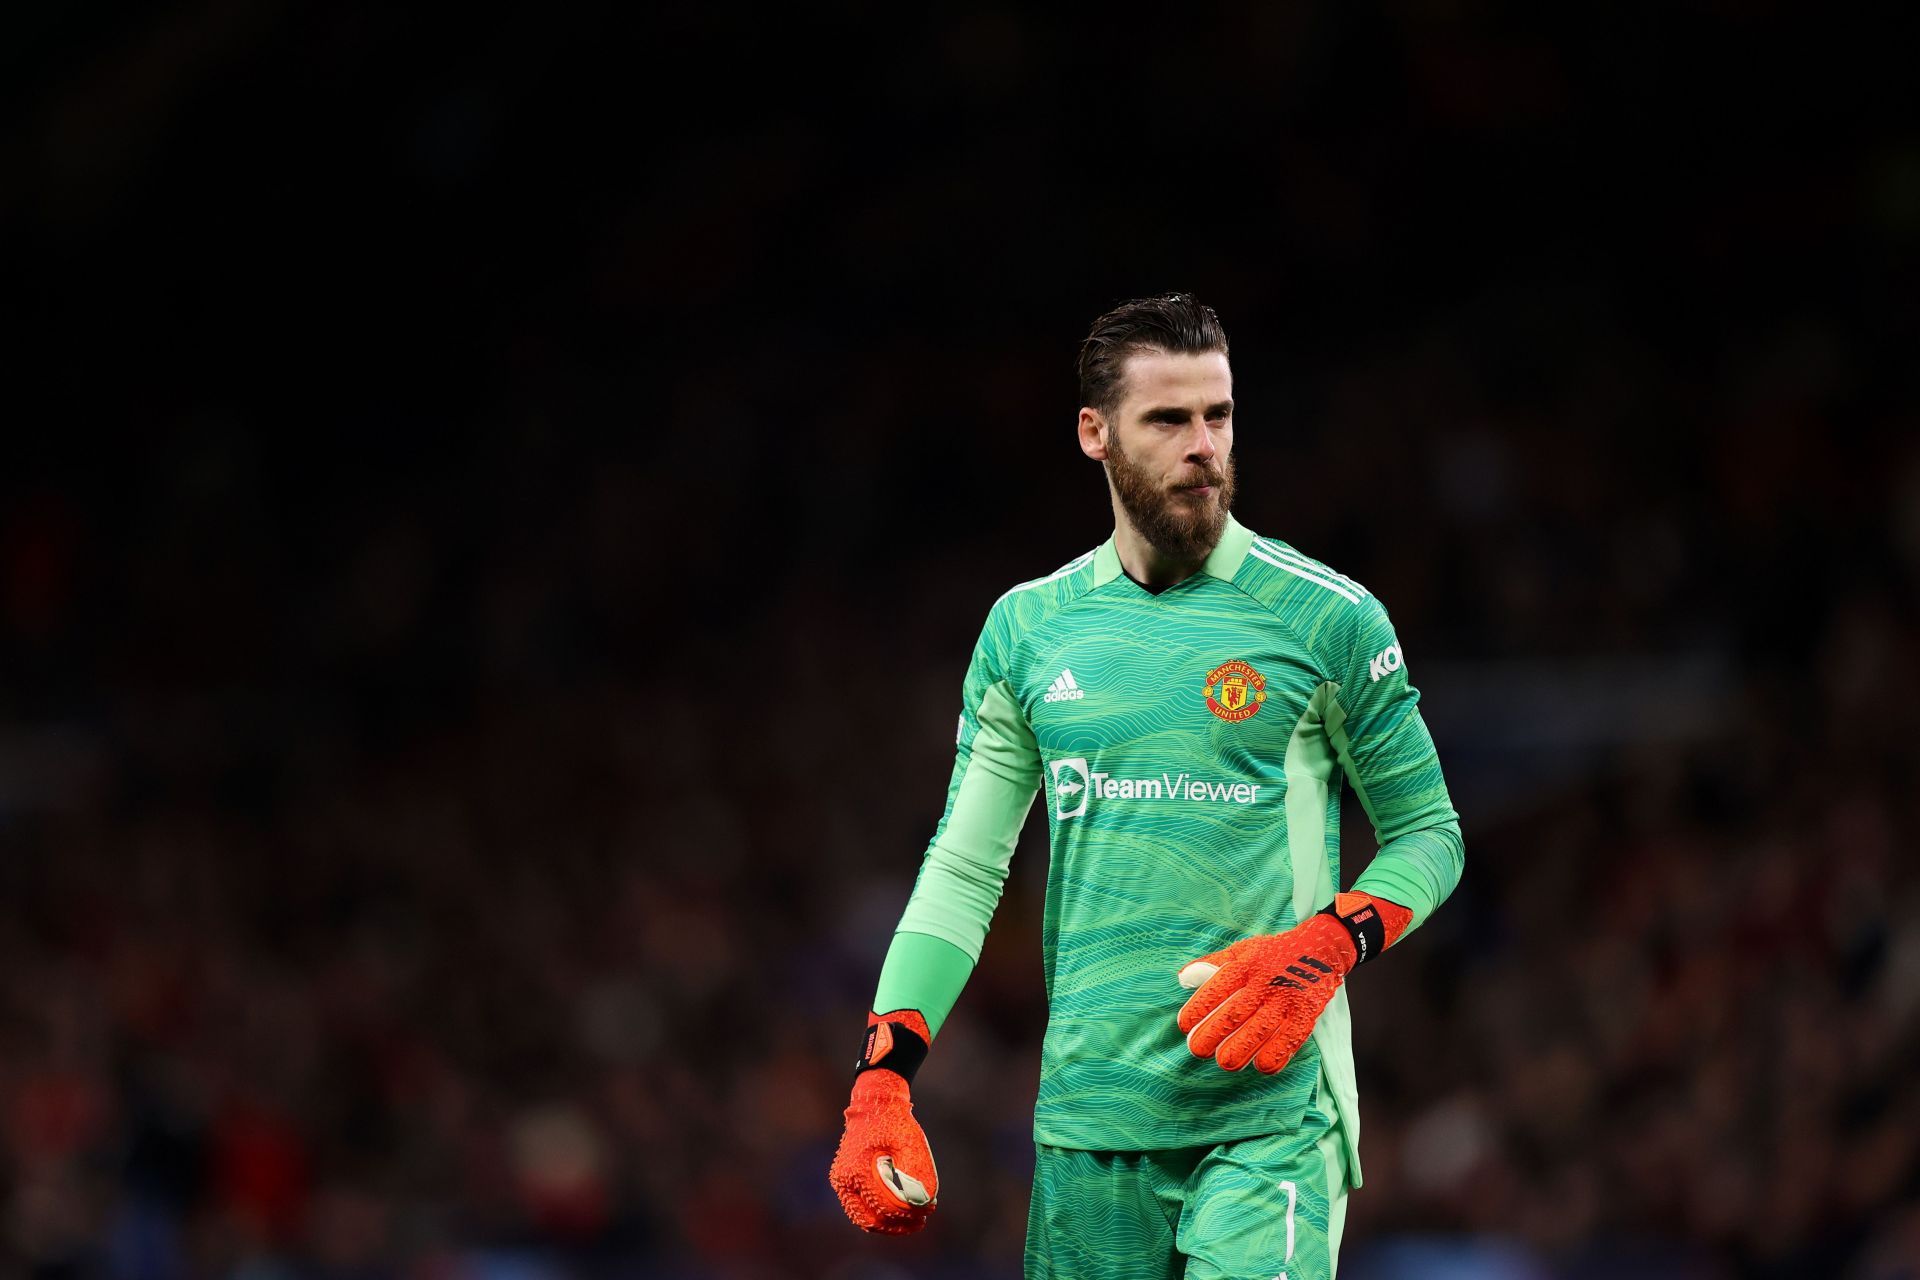 David de Gea is one of the active players with the most Premier League appearances.